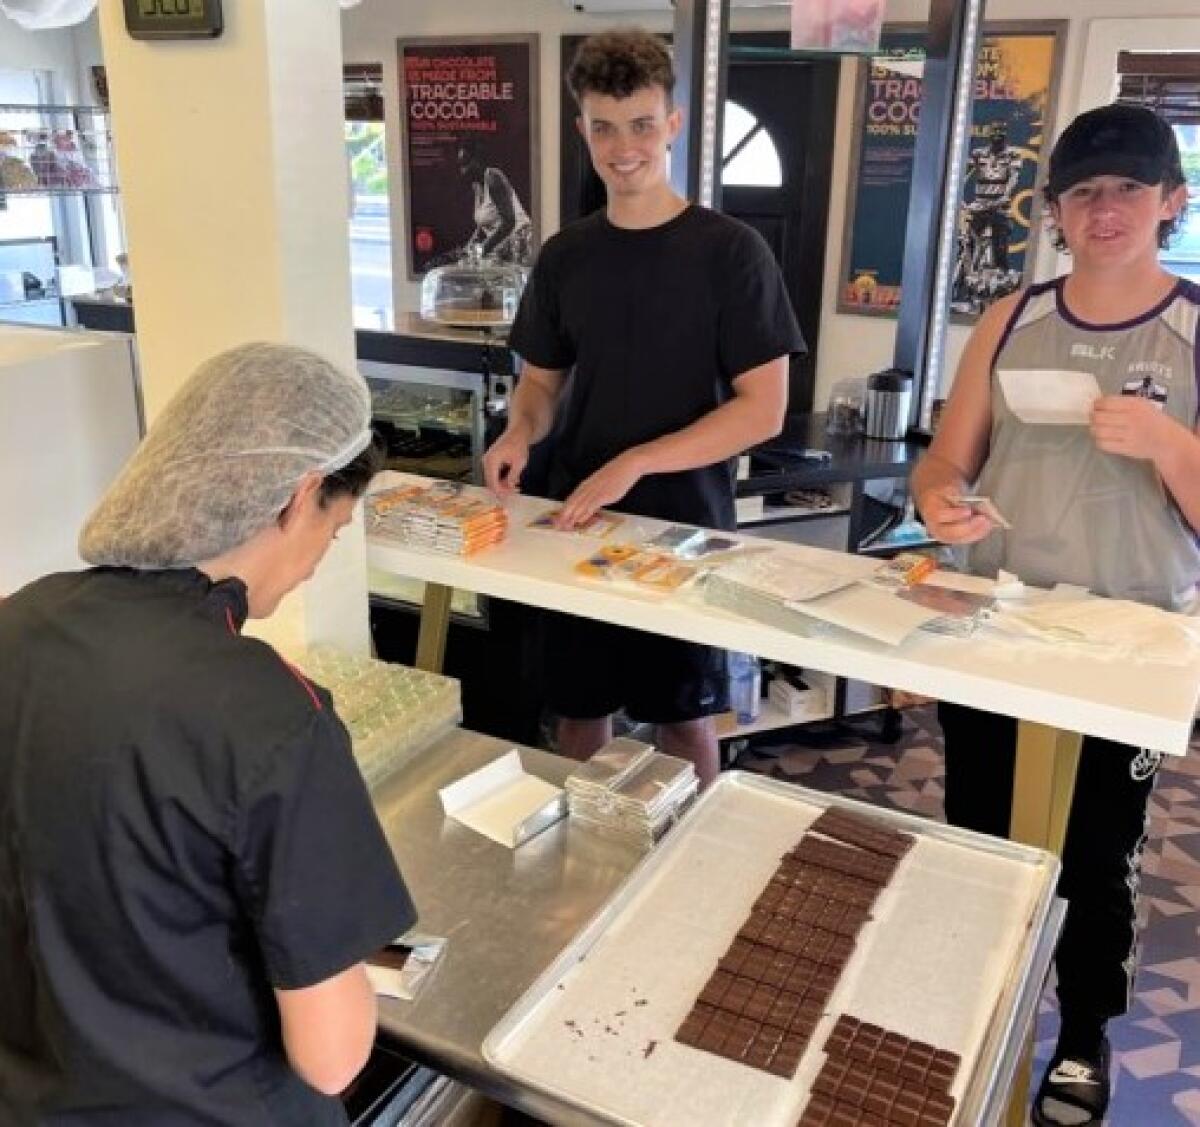 Camille McKenna wraps chocolate in foil while her stepson, Eoin, 25, and son, Gino, 15, add the Ukraine support stickers.